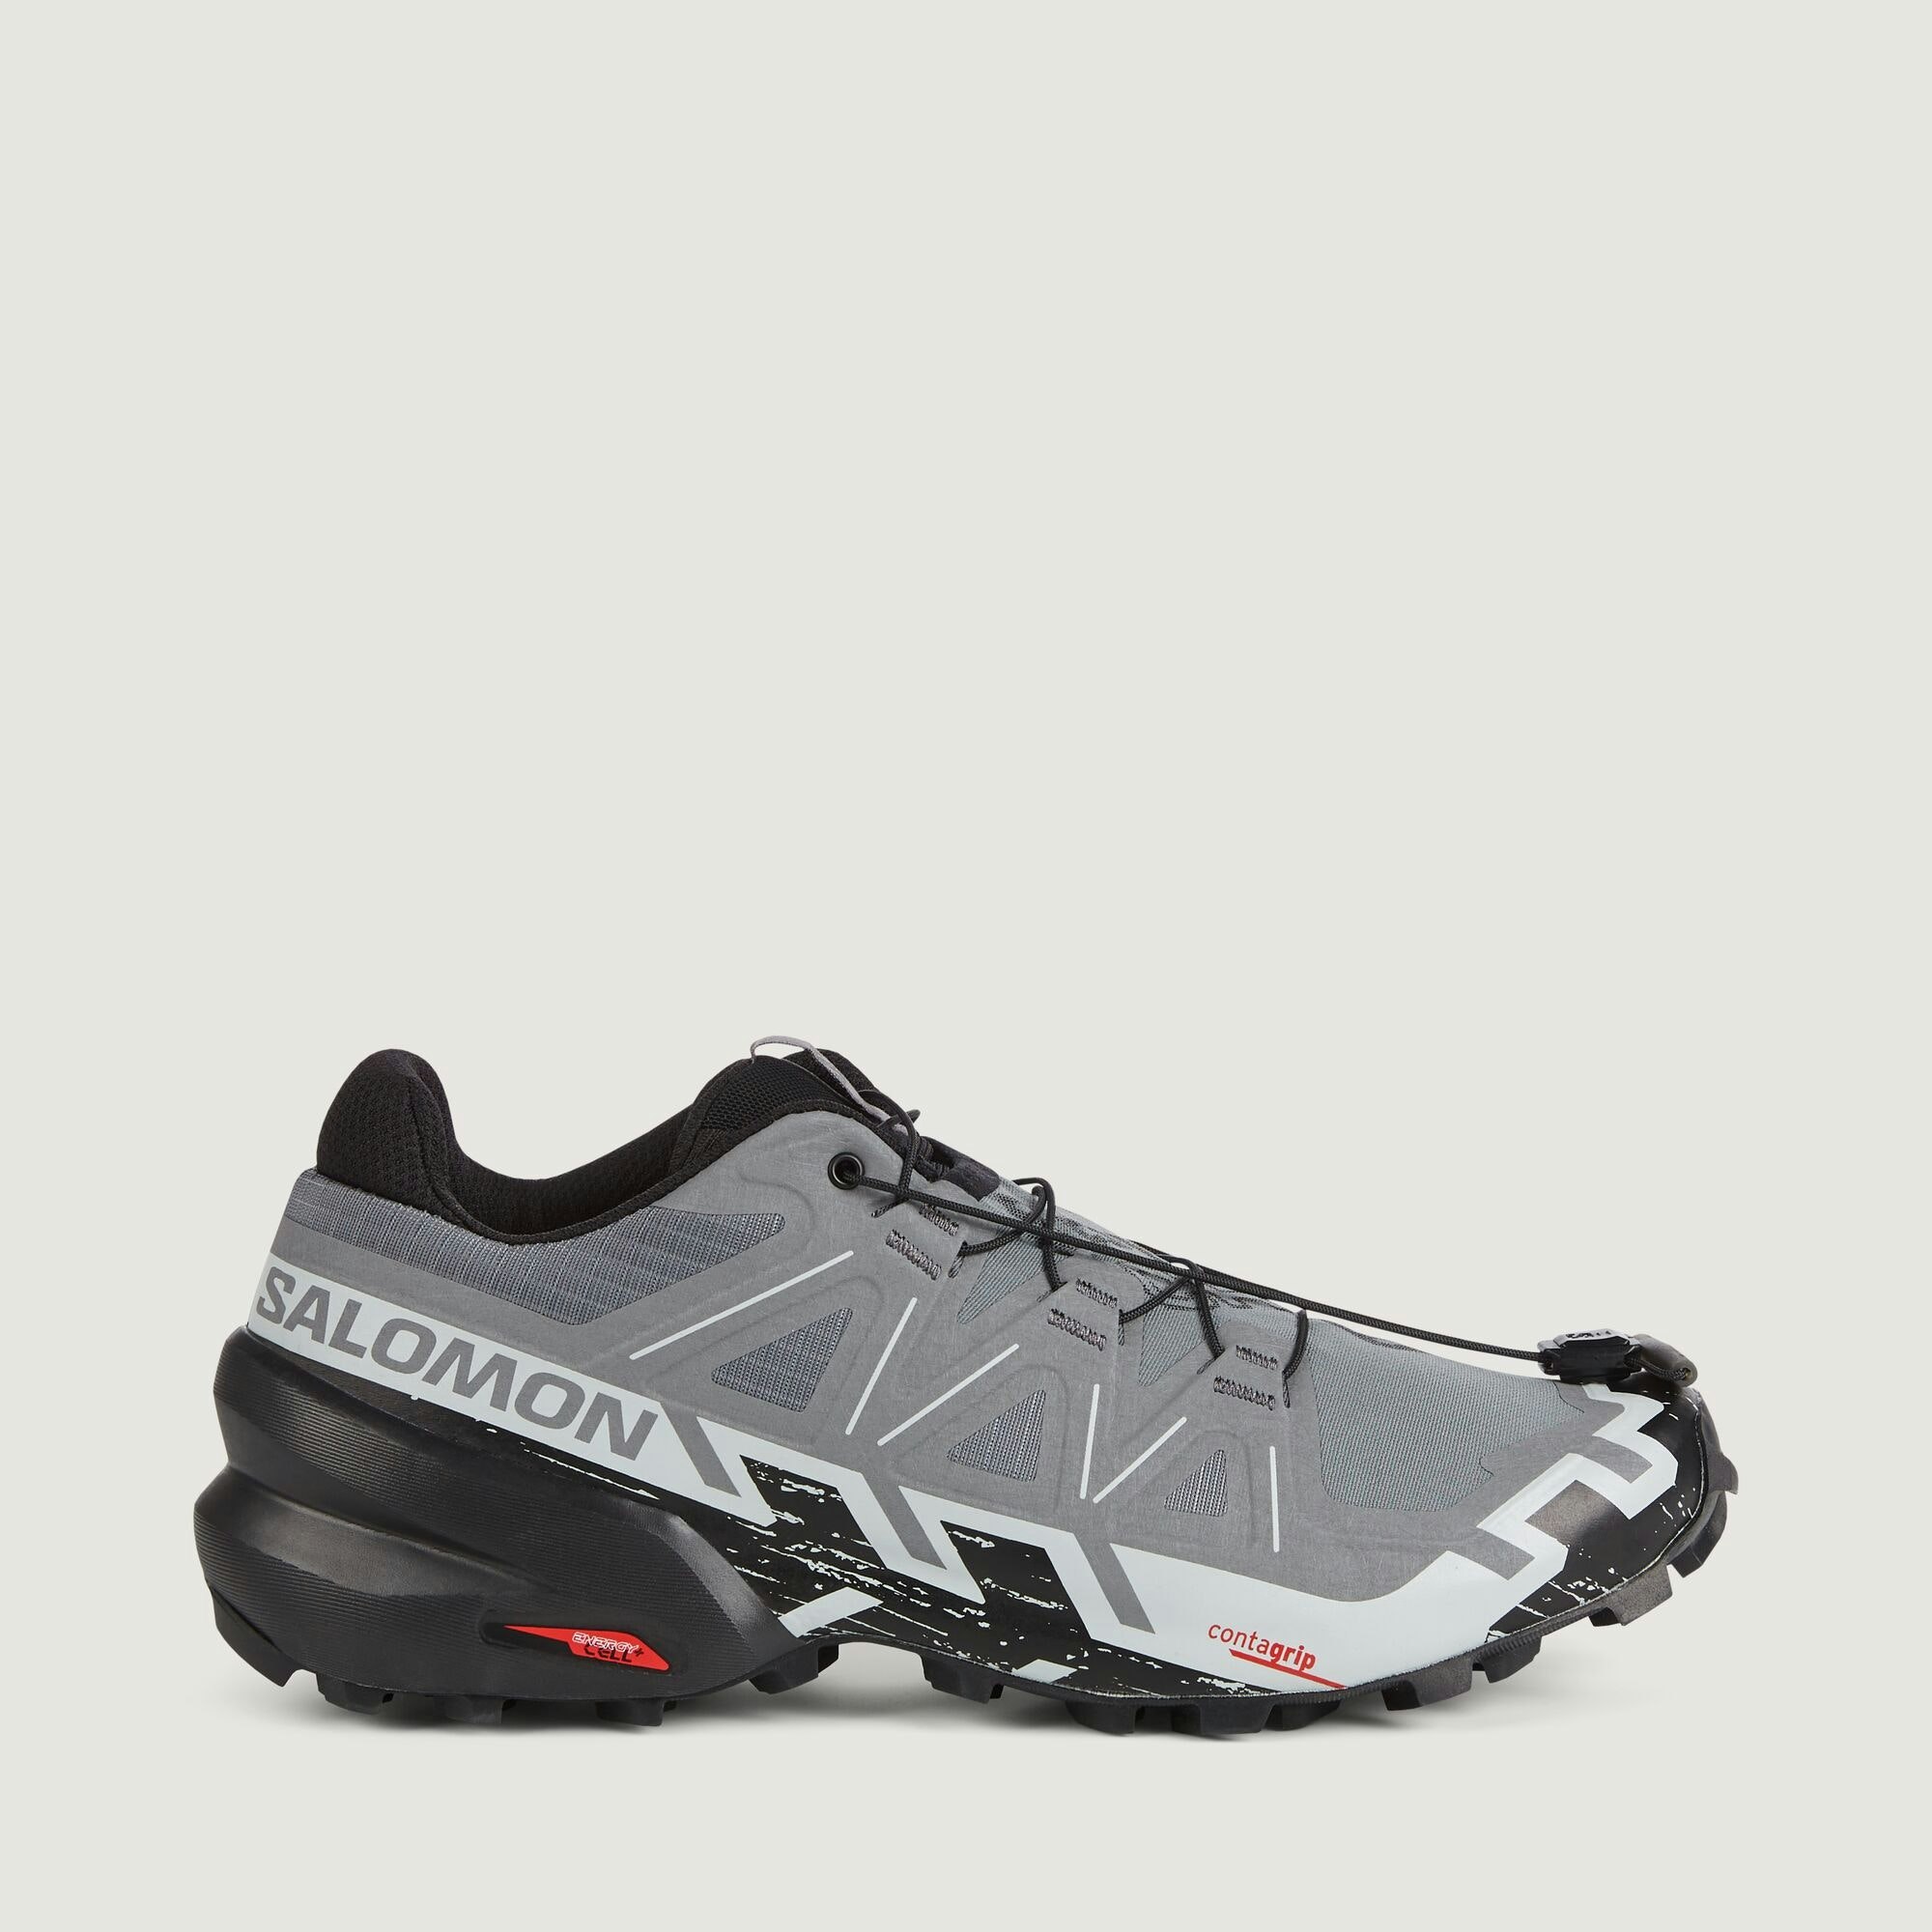 Shop 10 Pairs of Salomon Sneakers for Less than Retail Price